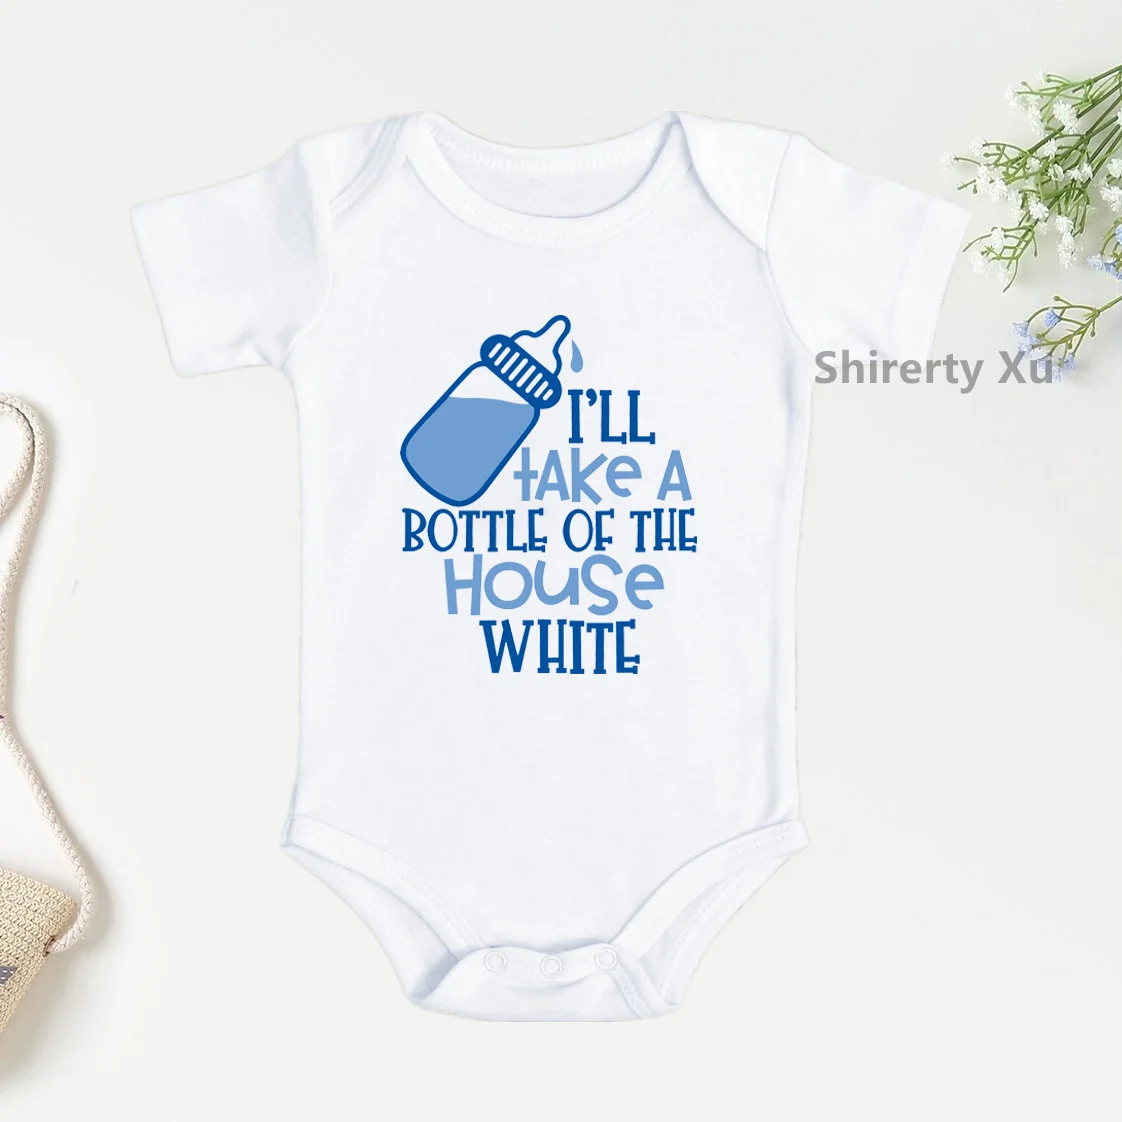 I'll Take A Bottle of The House White Funny Baby Onesie Breastfeeding Newborn Baby Bodysuits Cotton Baby Boys Girls Clothes